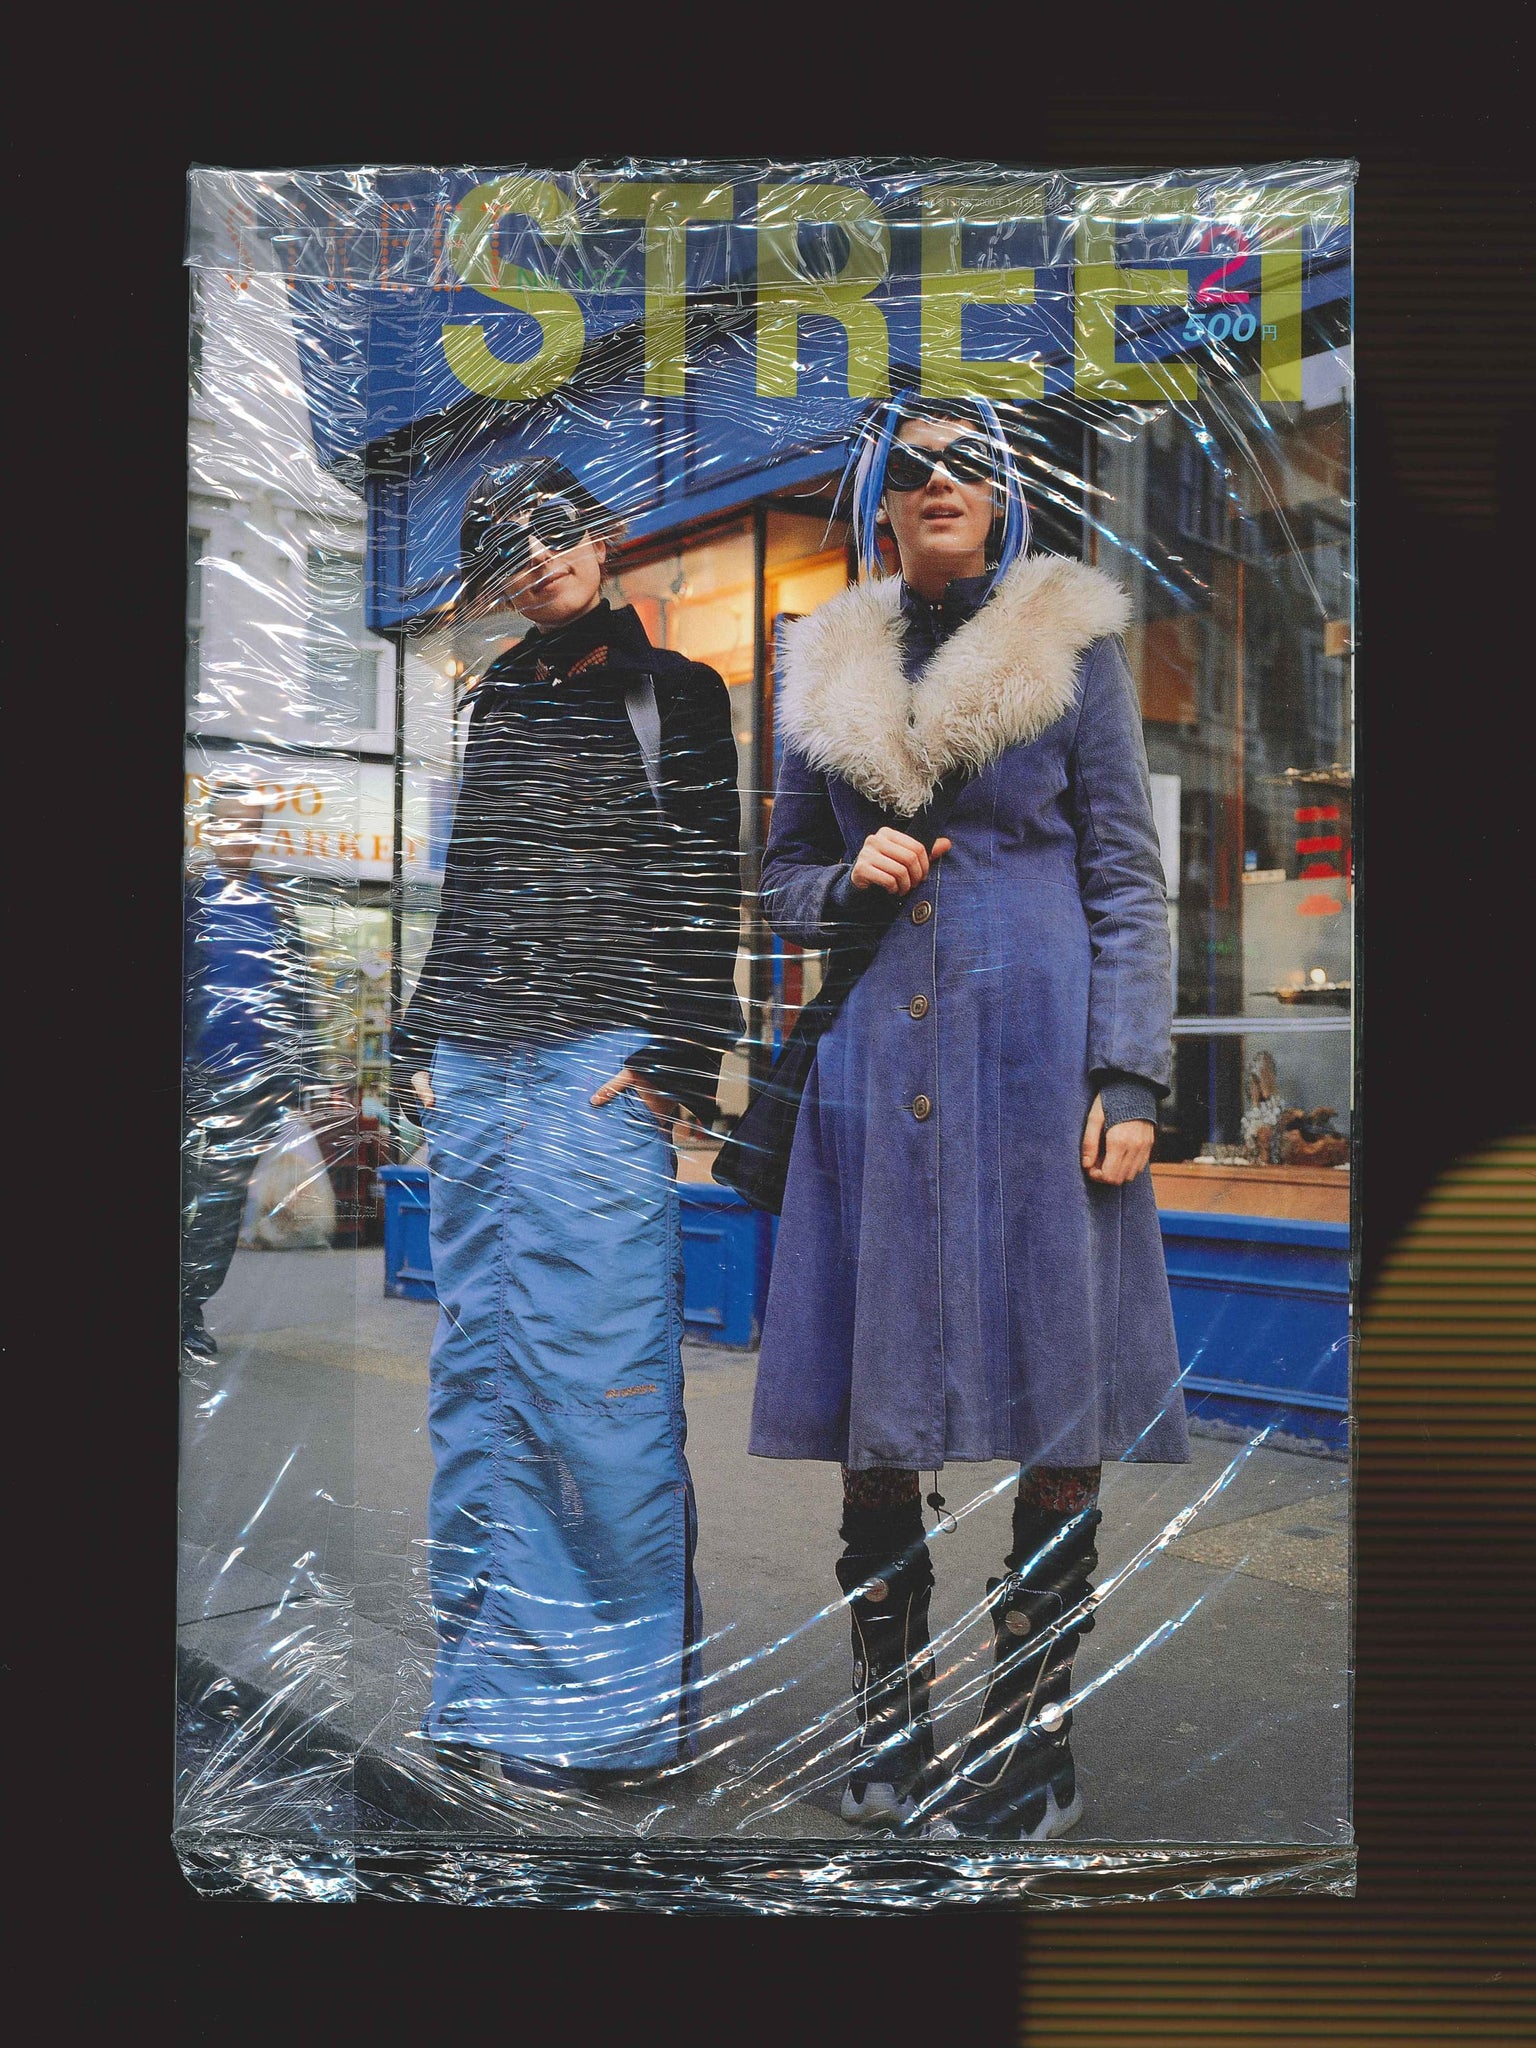 STREET magazine no. 127 / february 2000 / london and paris collections